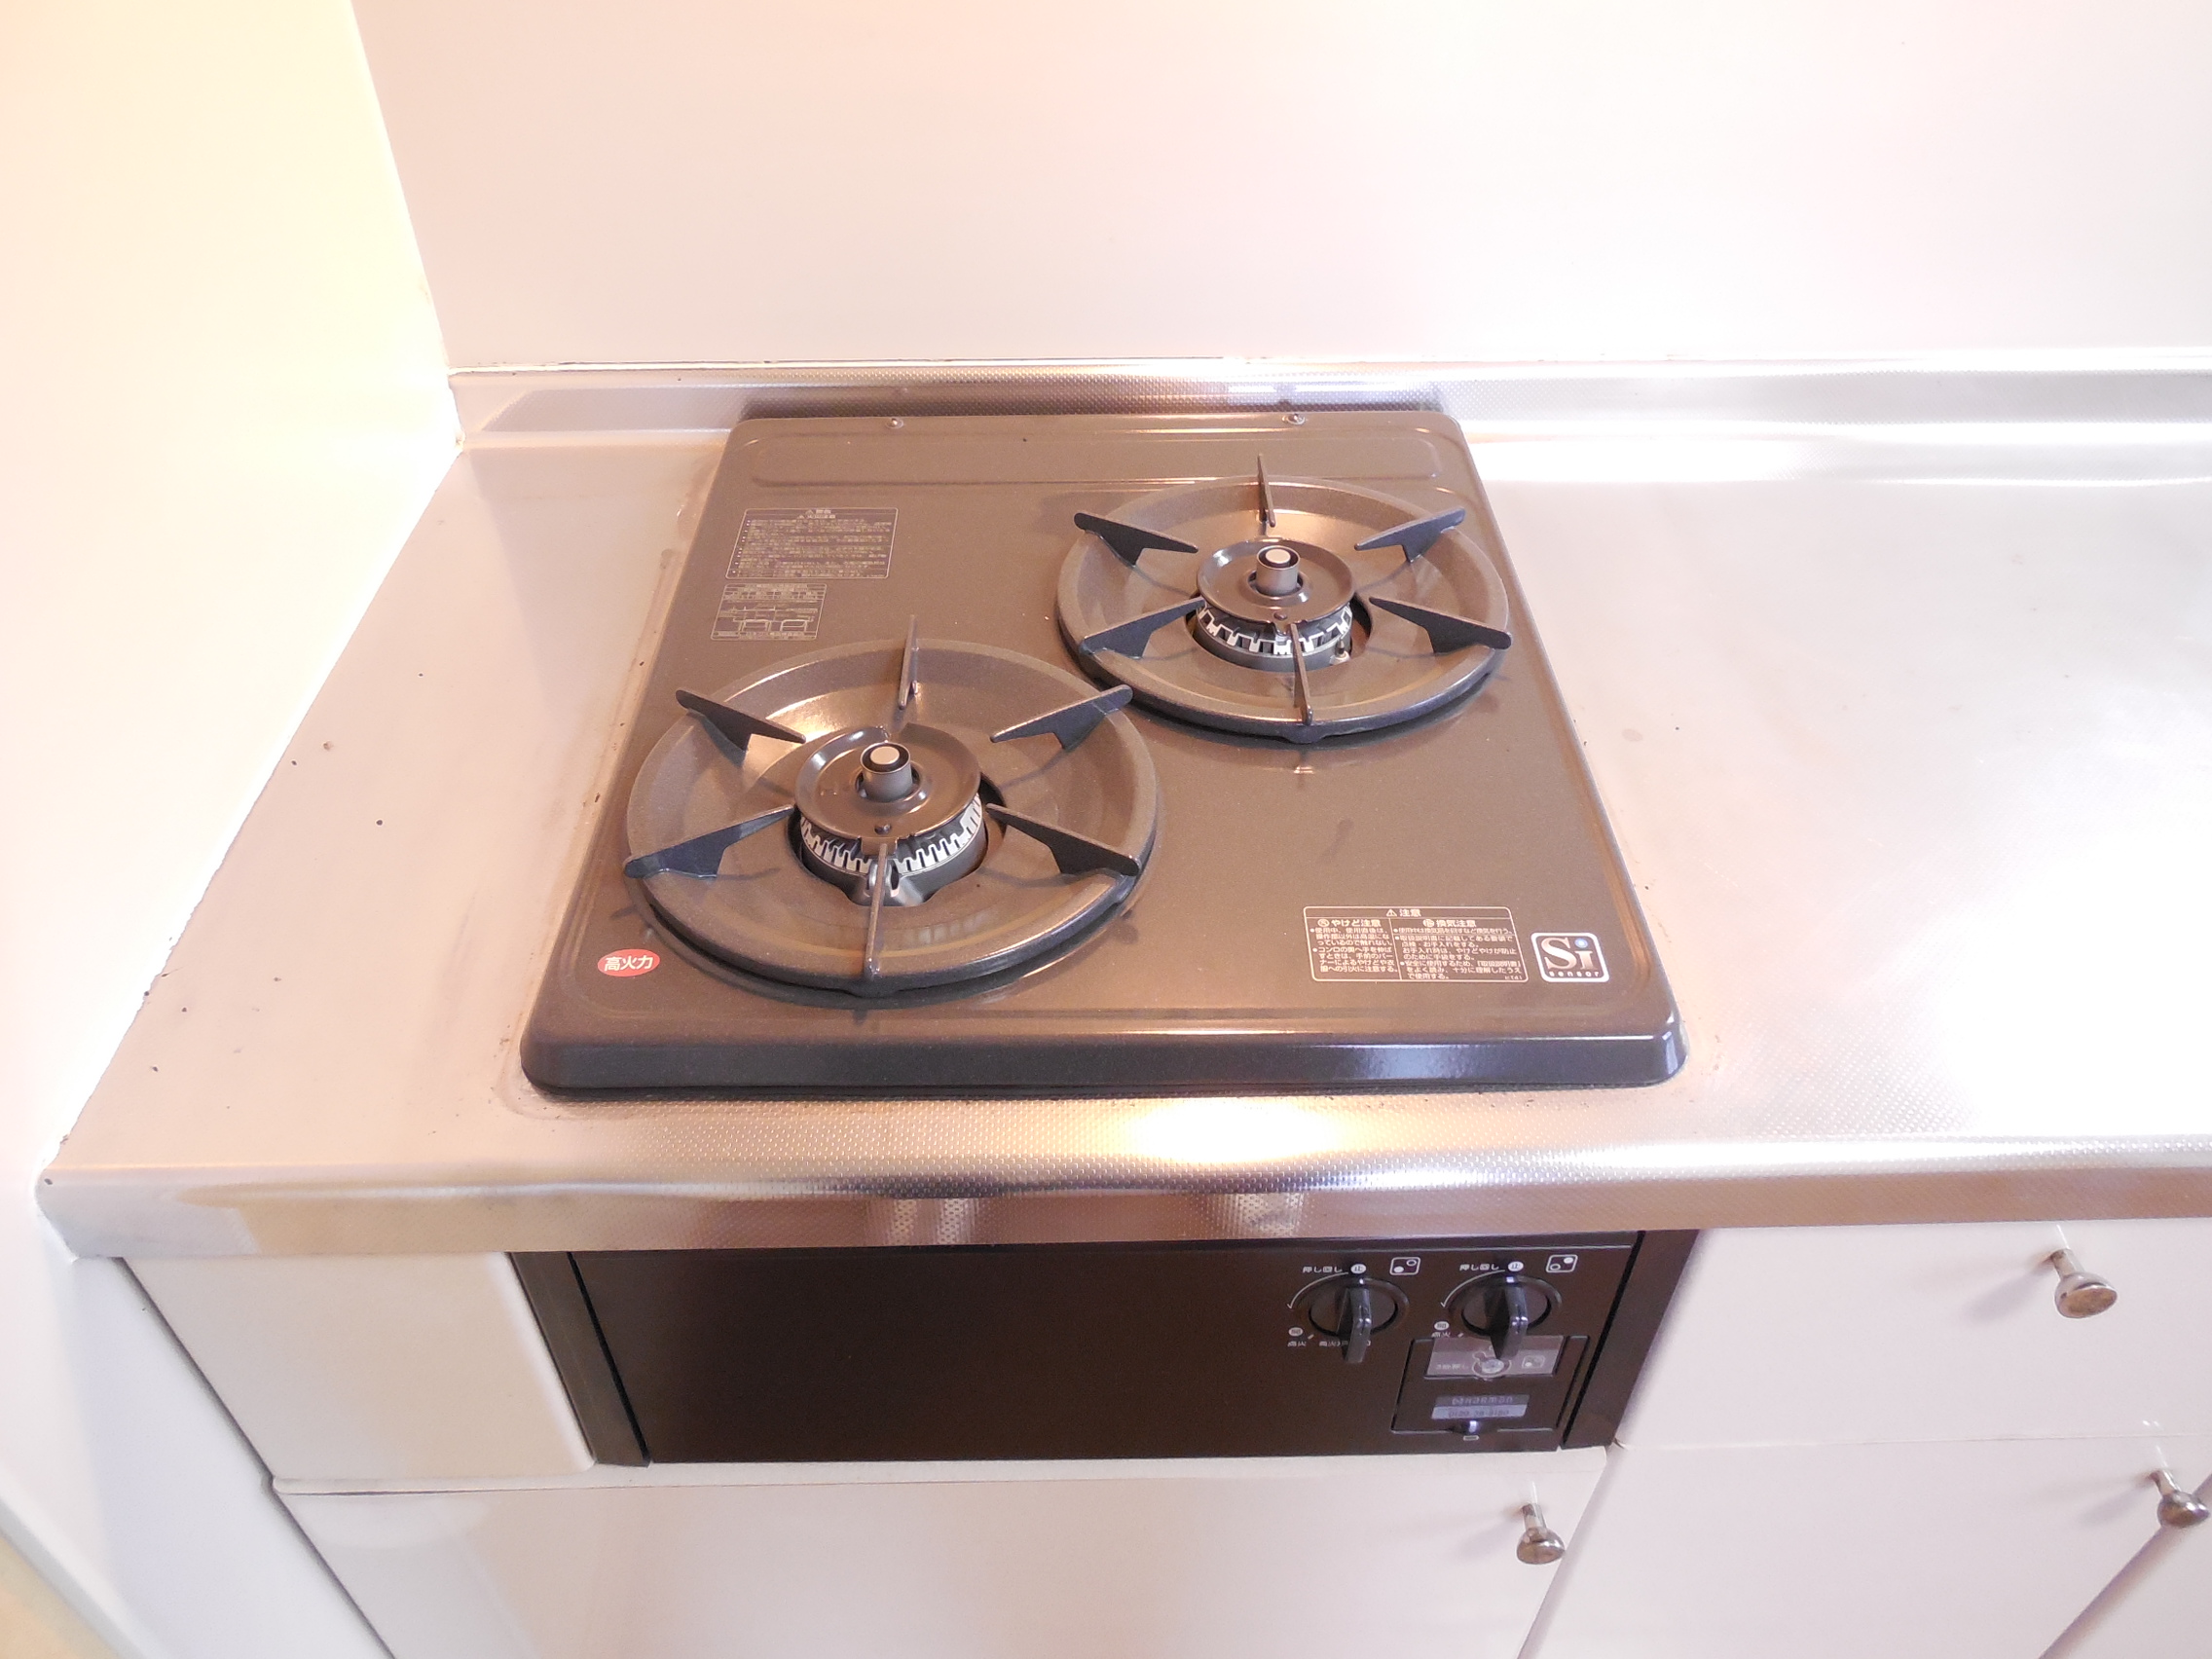 Other Equipment. Two-burner stove